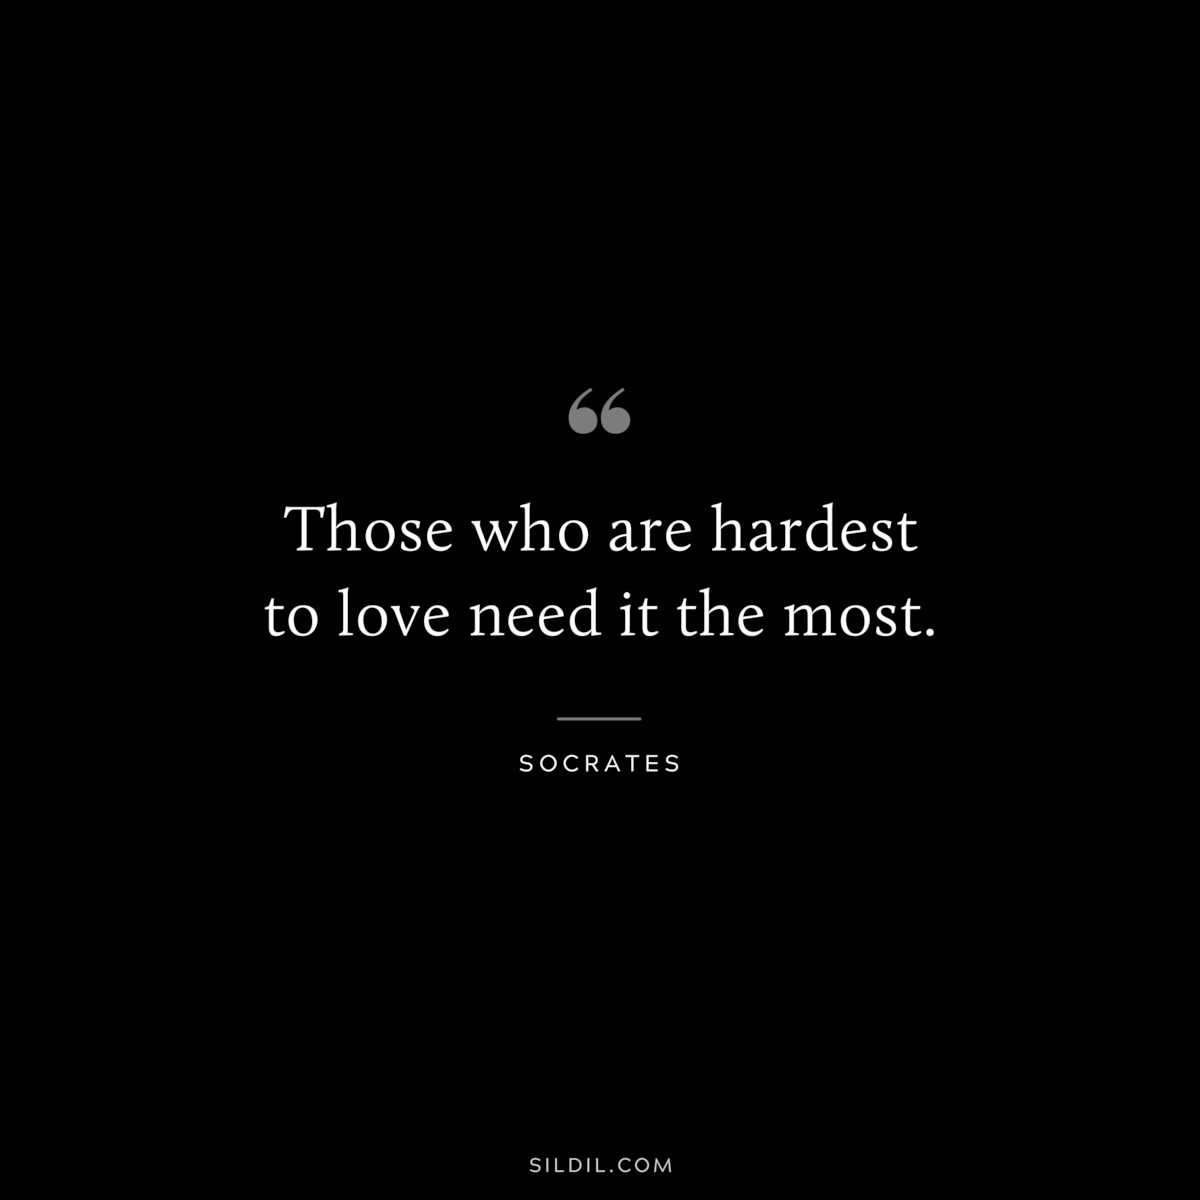 Those who are hardest to love need it the most. ― Socrates